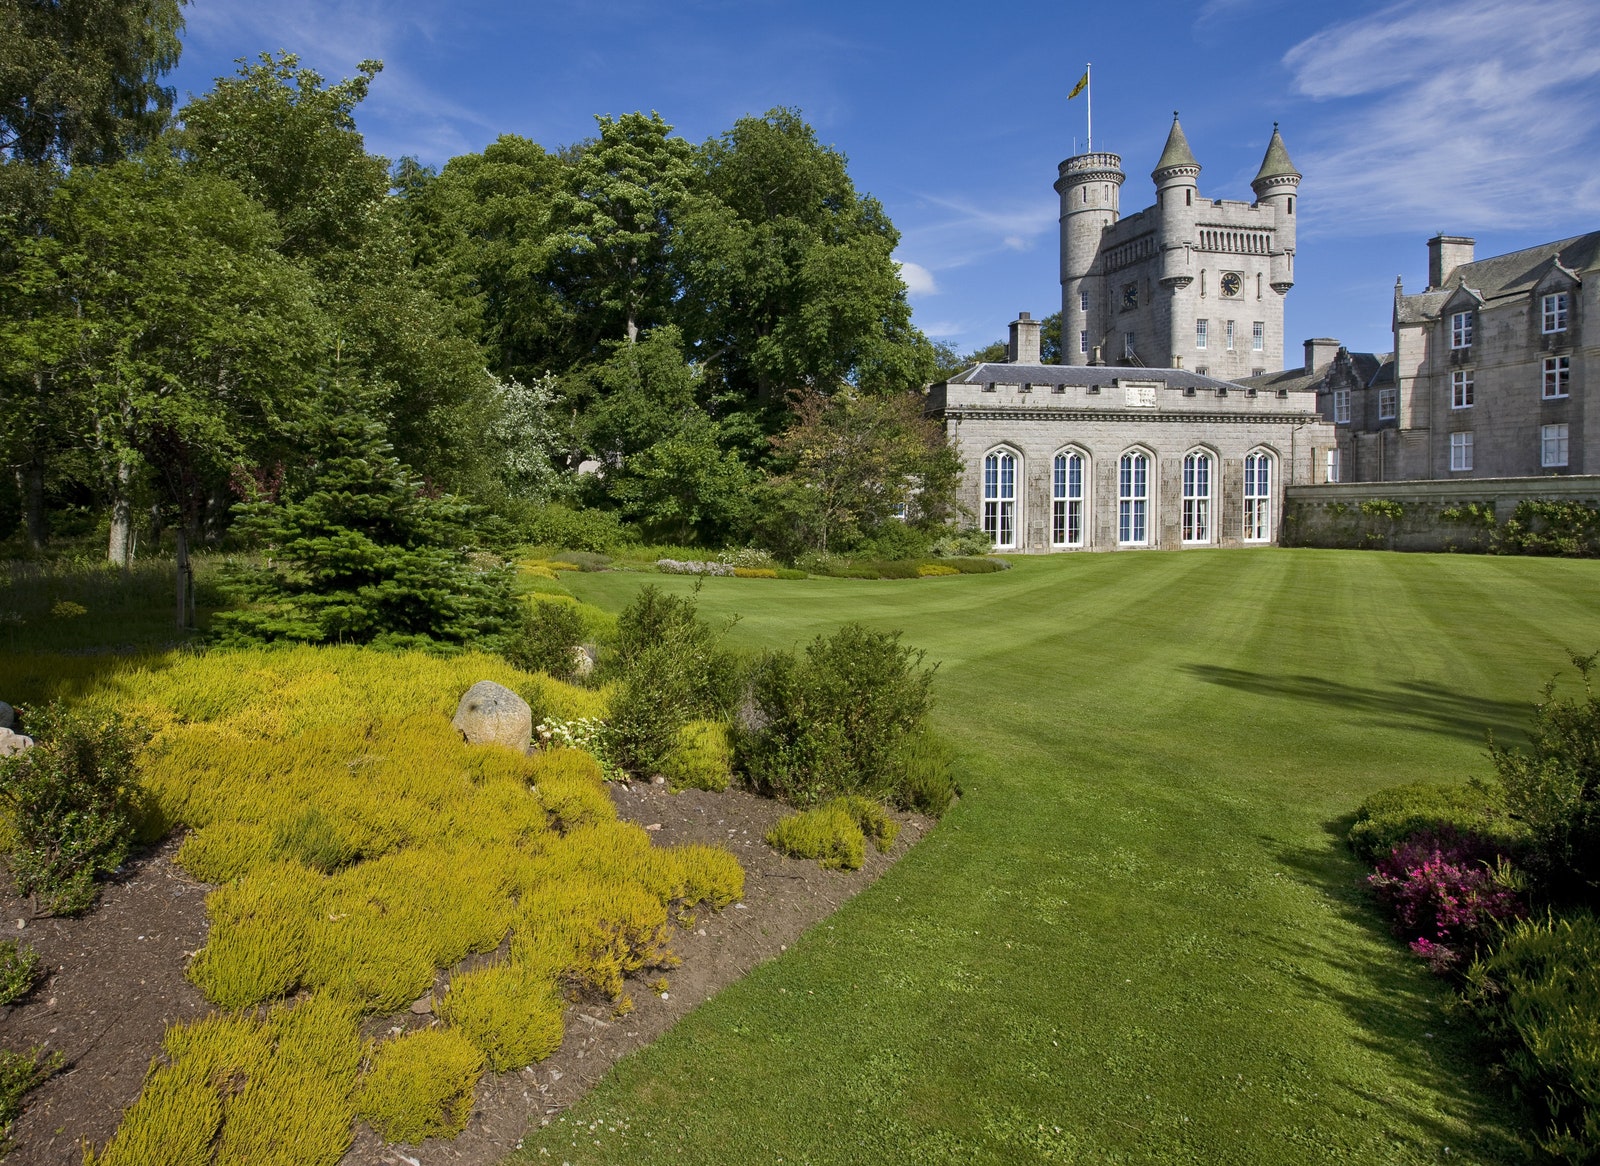 The mowed grass lawn and landscaped shrubbery at Balmoral castle in far background